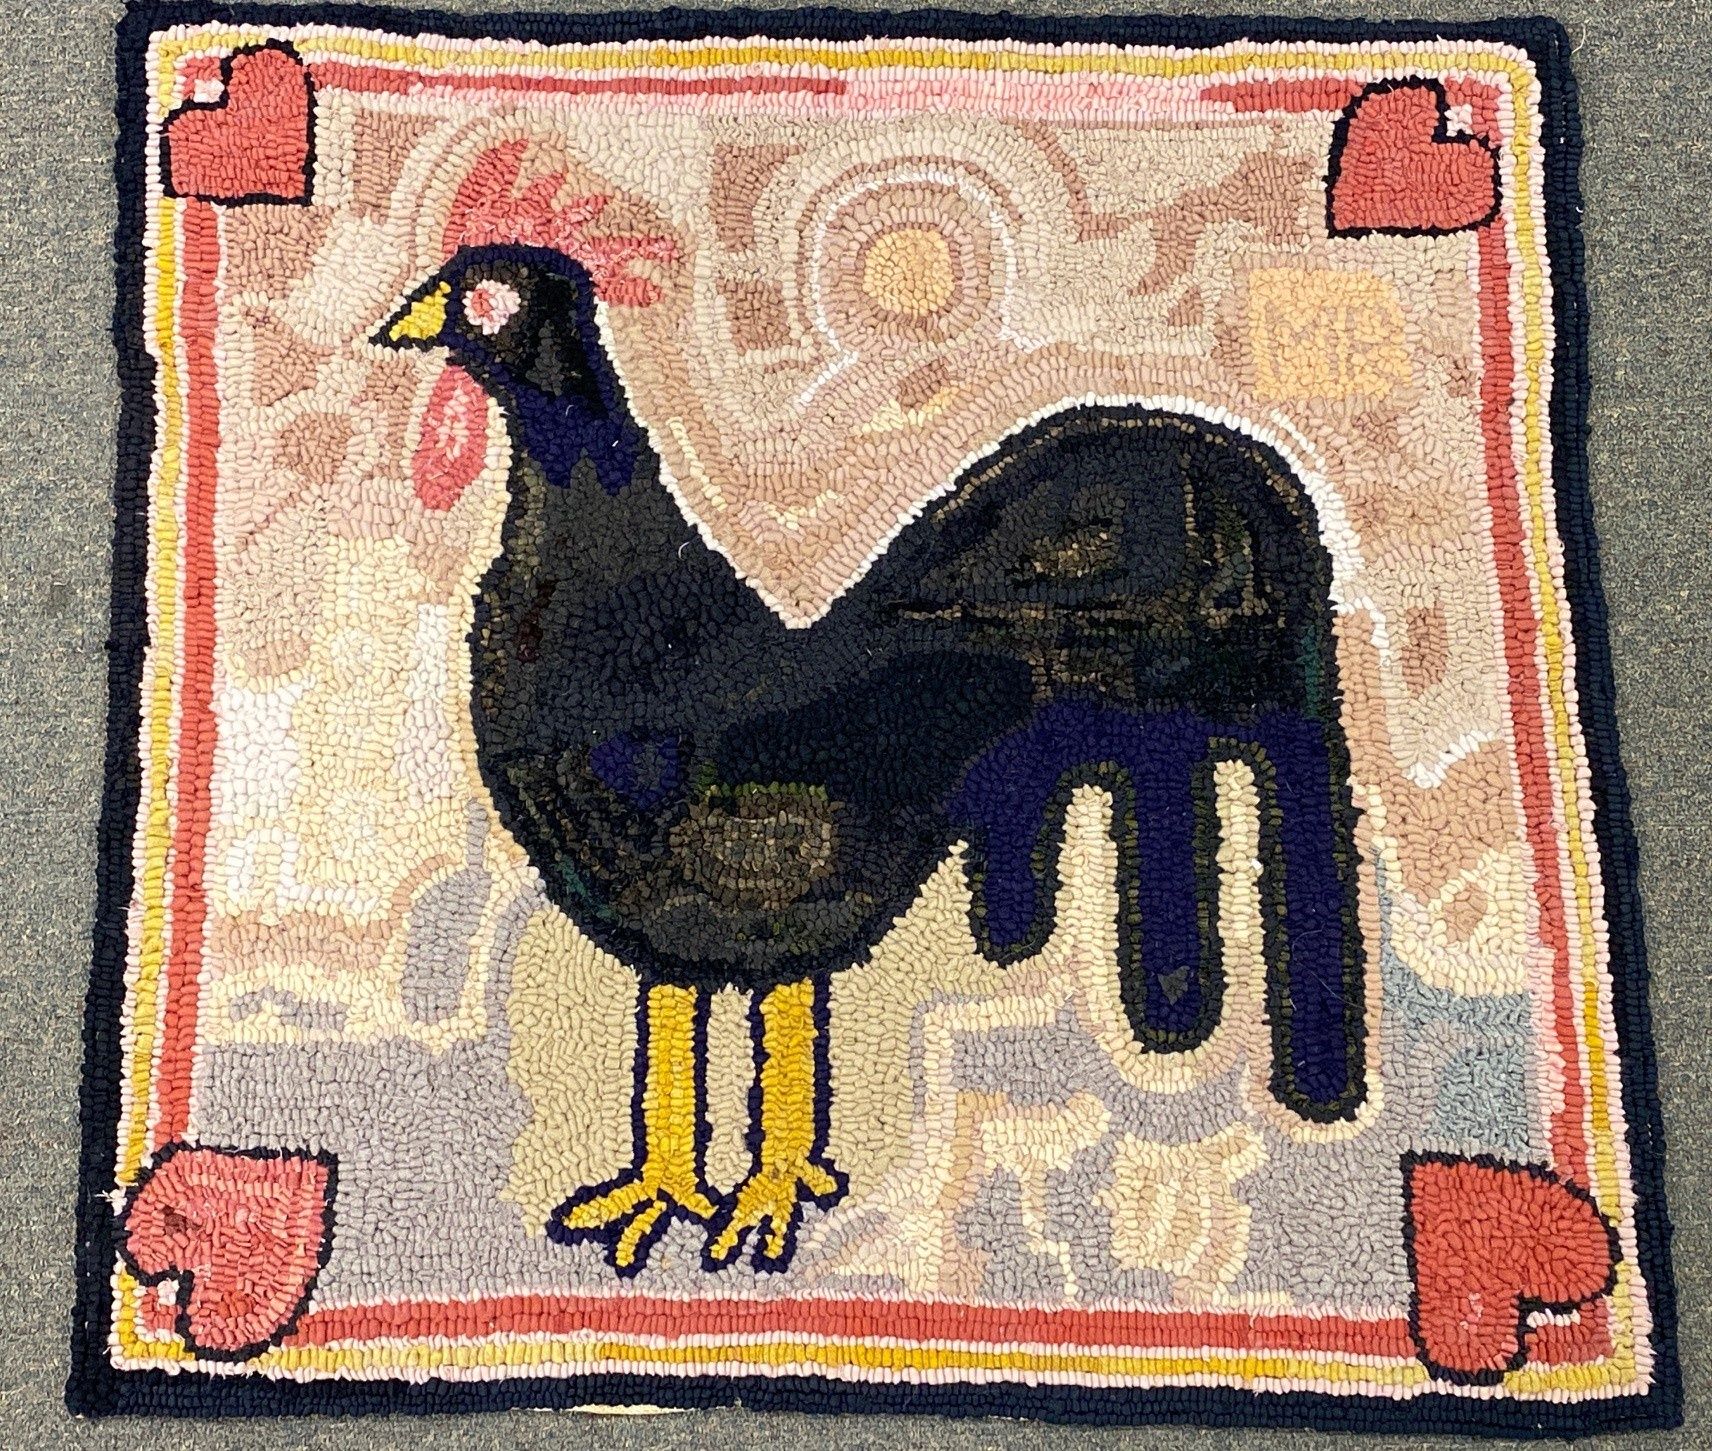  Hooked Rug with Rooster and Hearts